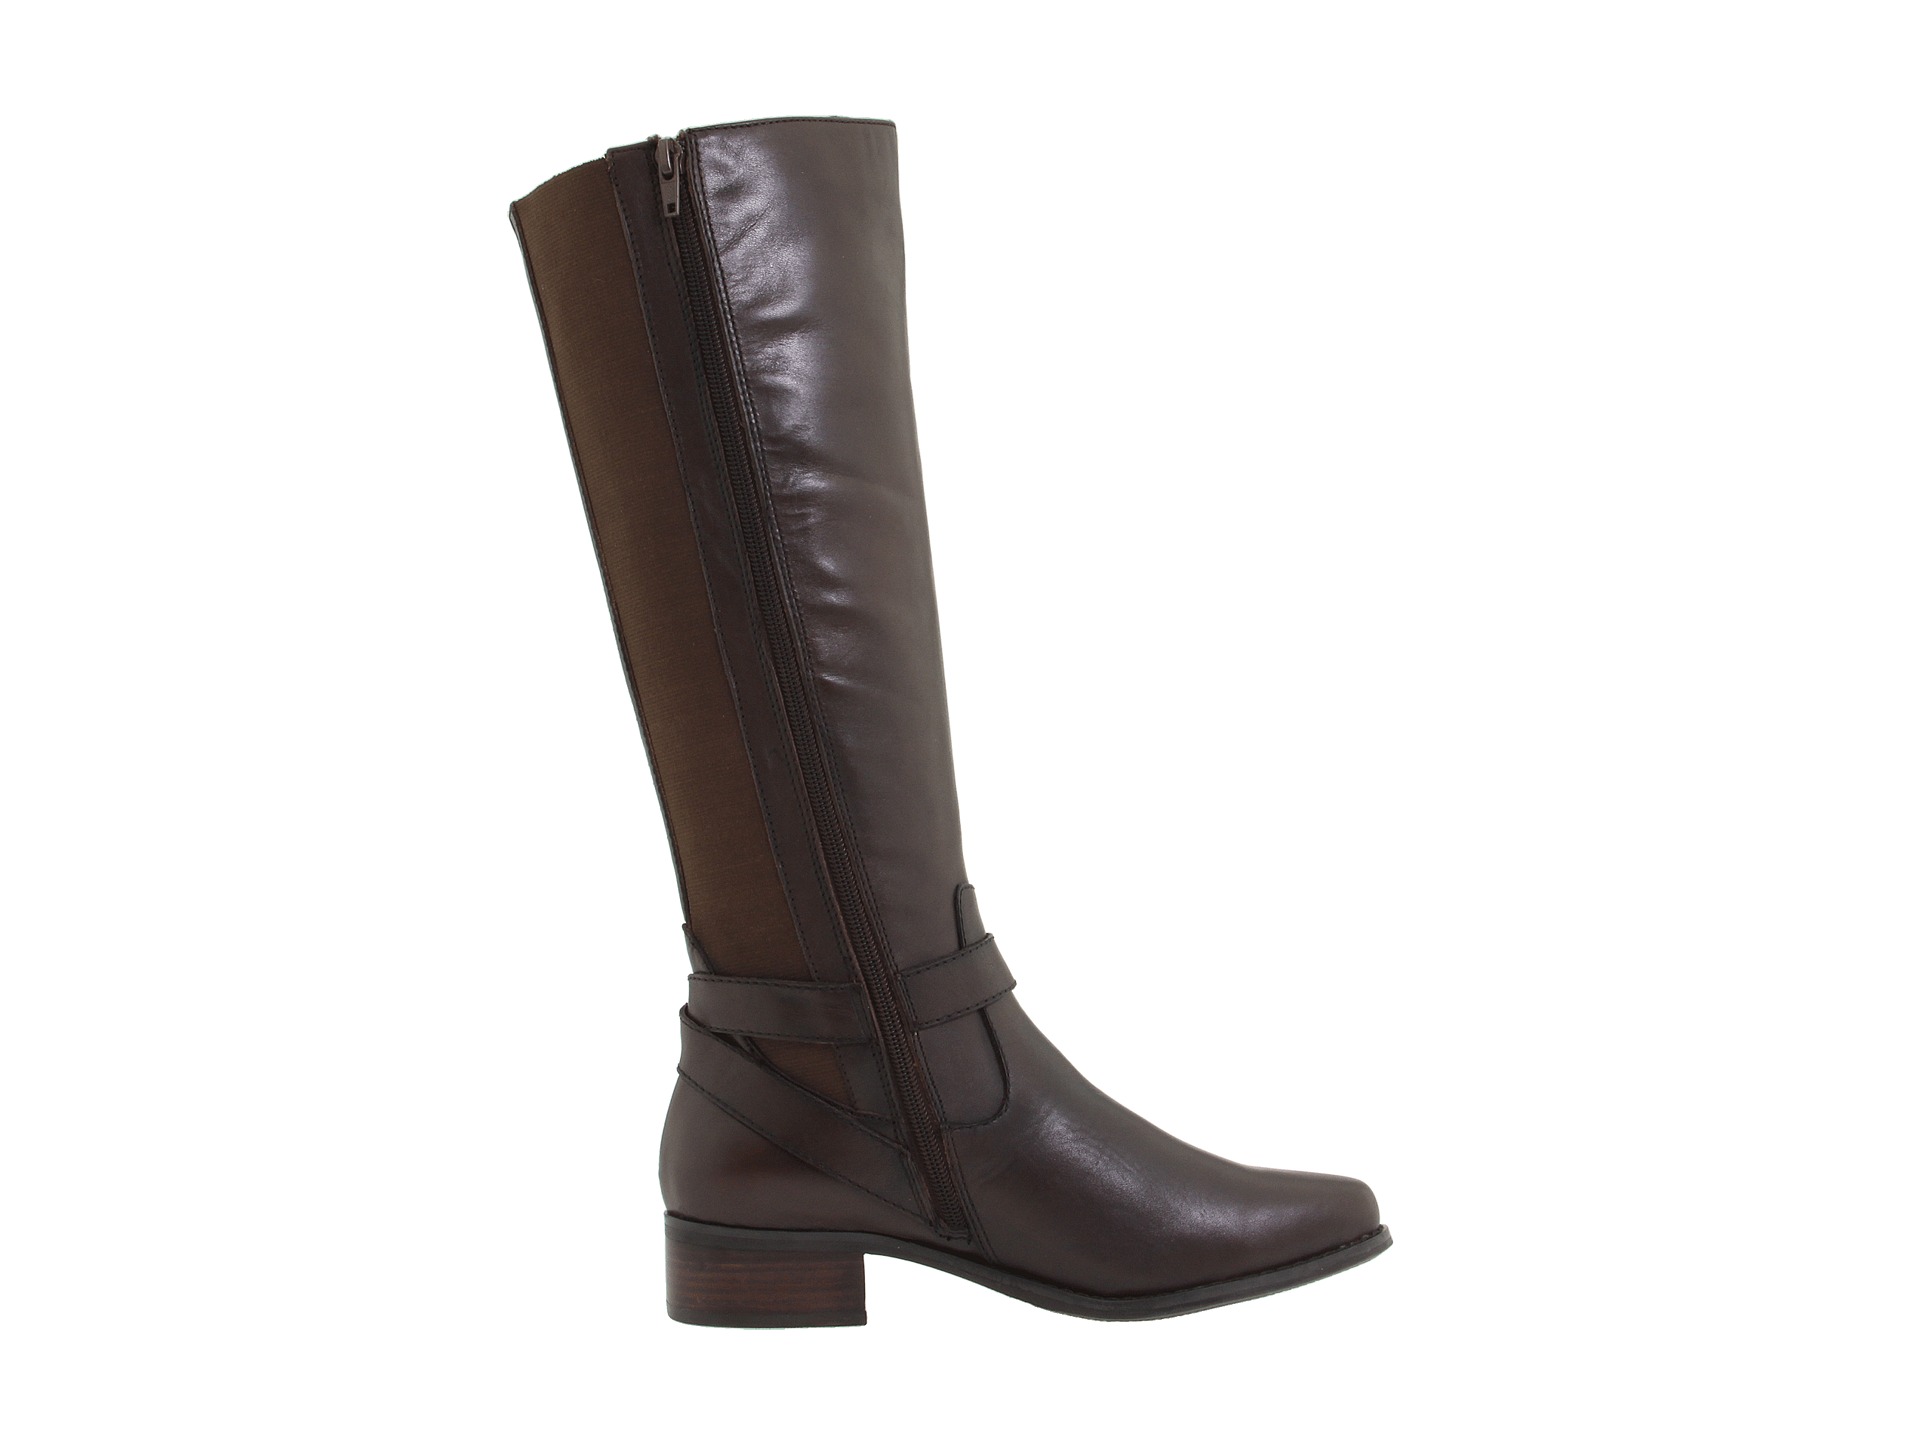 Fitzwell Mentor Wide Calf Boot | Shipped Free at Zappos